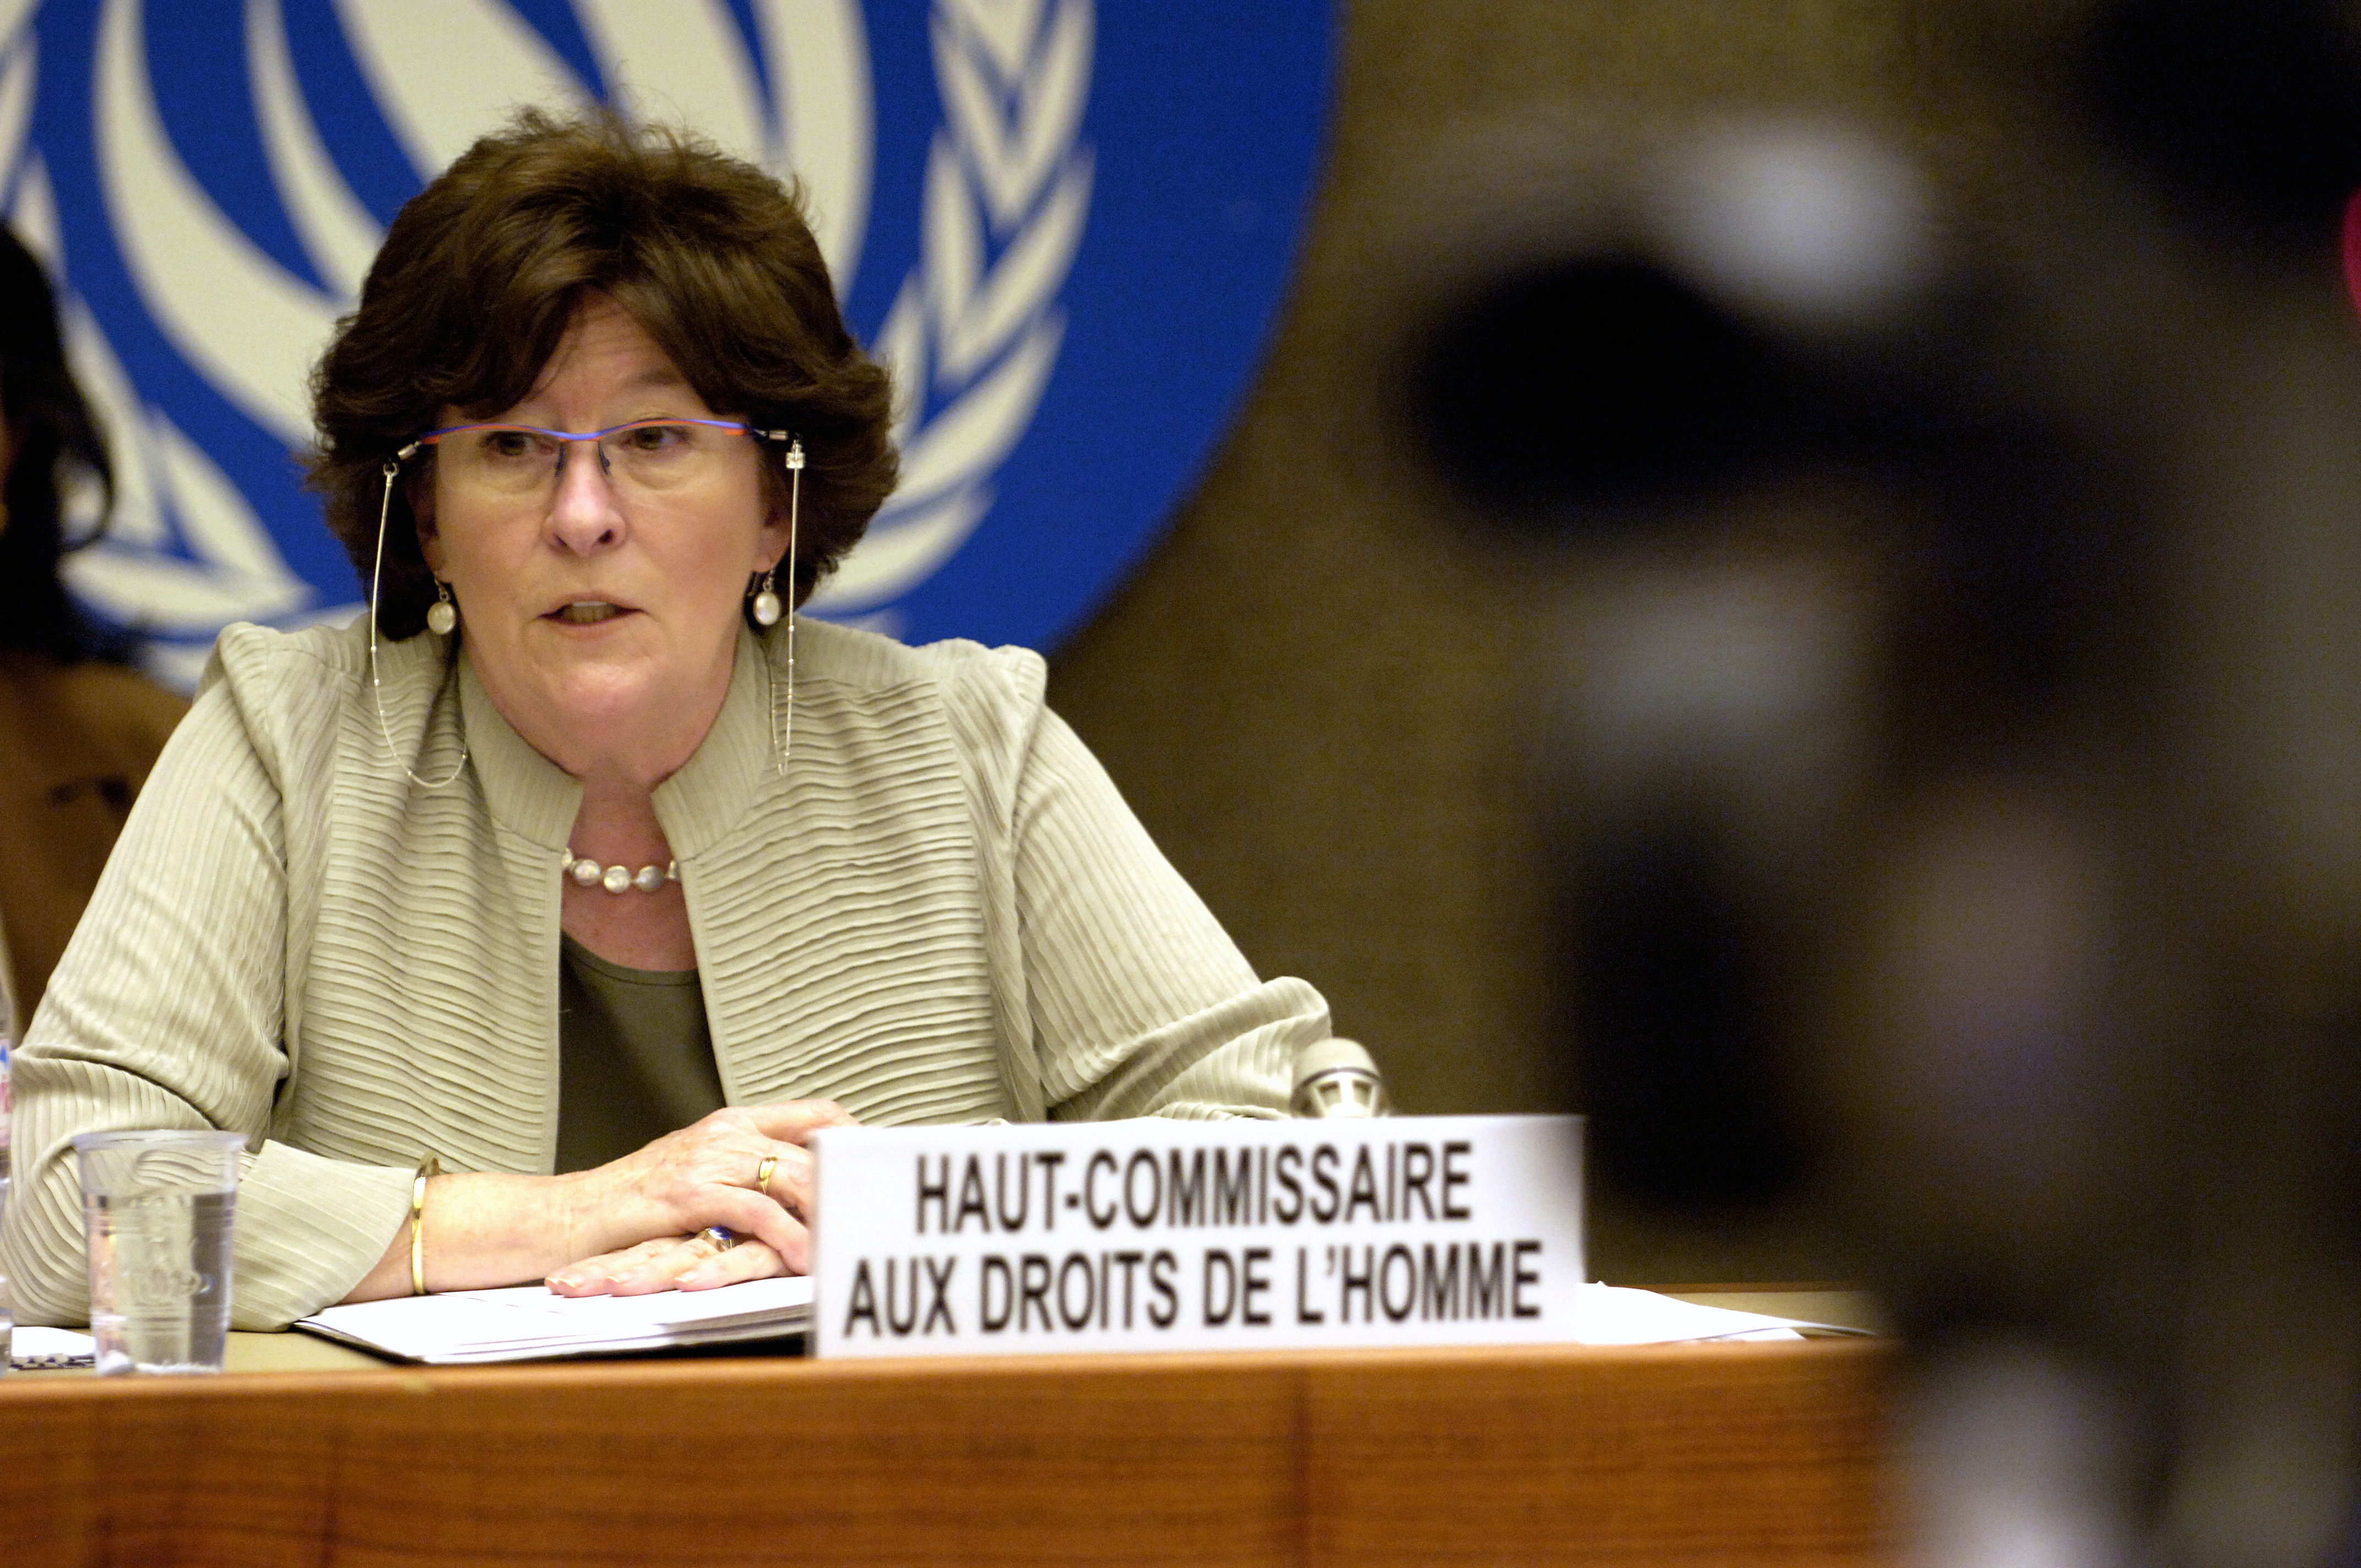 14/03/2007 - GENEVA - SWITZERLAND- Ms Louise Arbour, High Commissioner of Human Rights for the United Nations during the annual rapport at the Human Rights Council. Photo UN / Jean-Marc FERRE